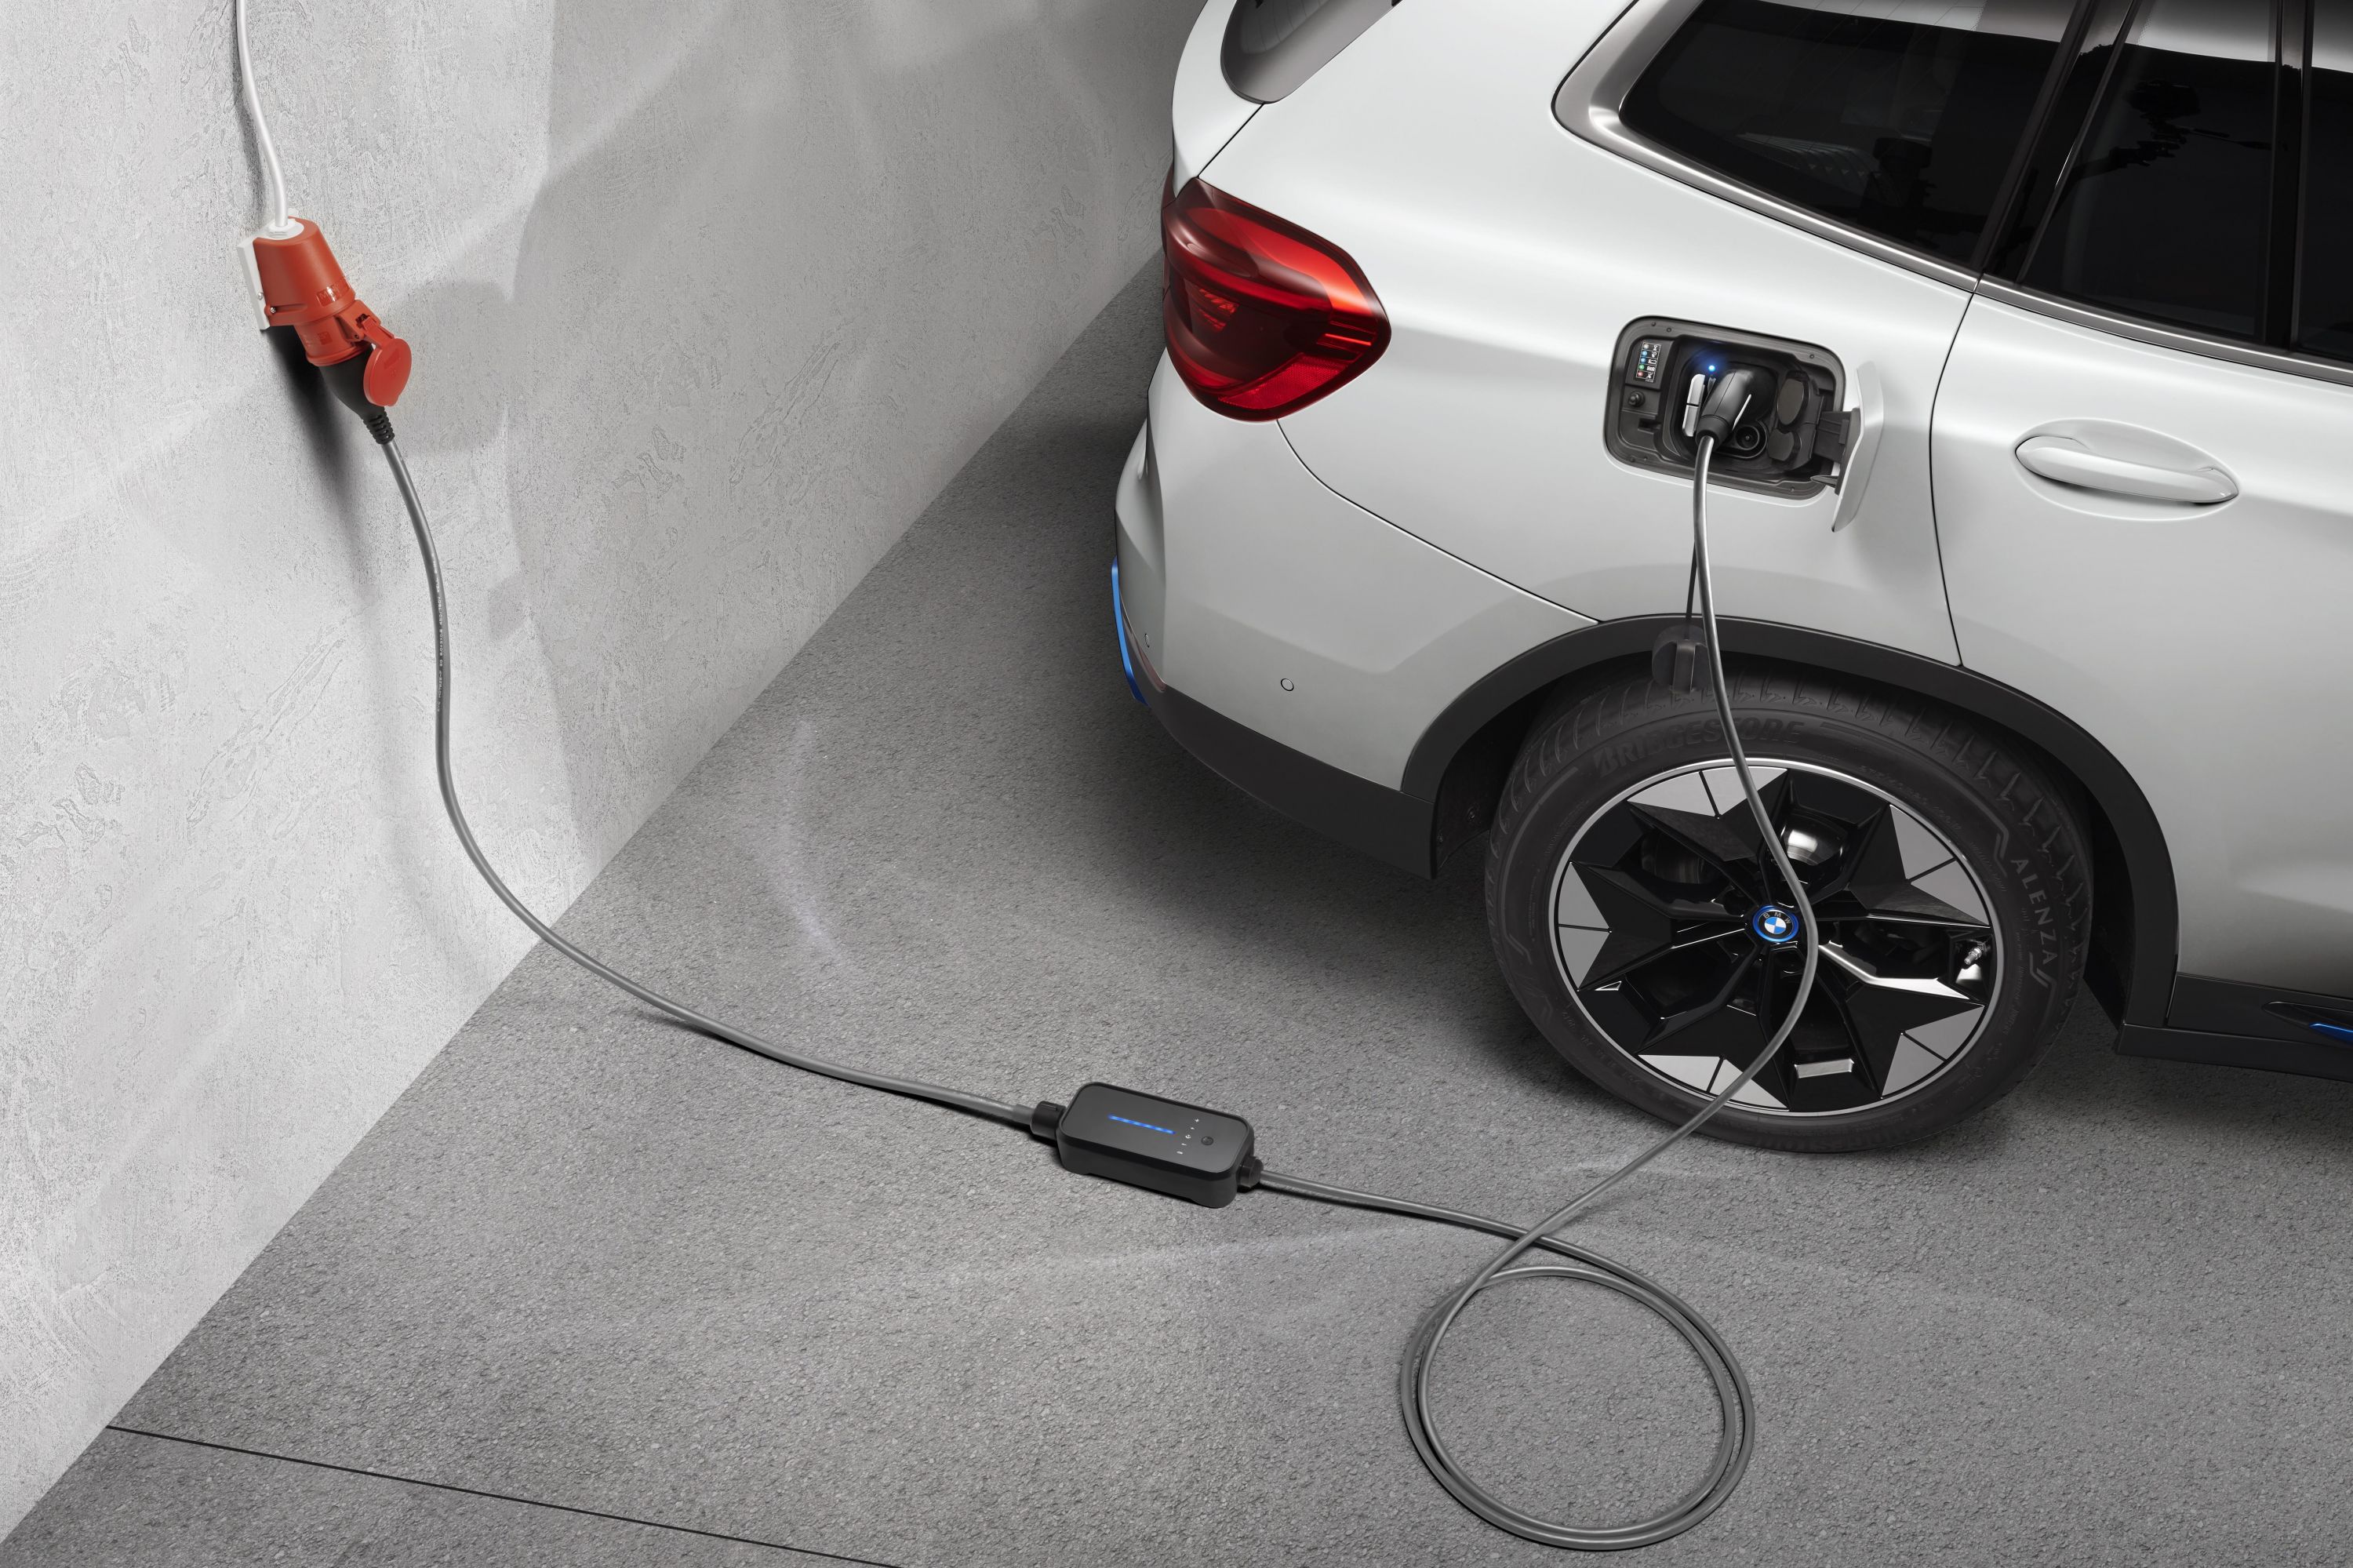 EV home charging What are the options? CarExpert